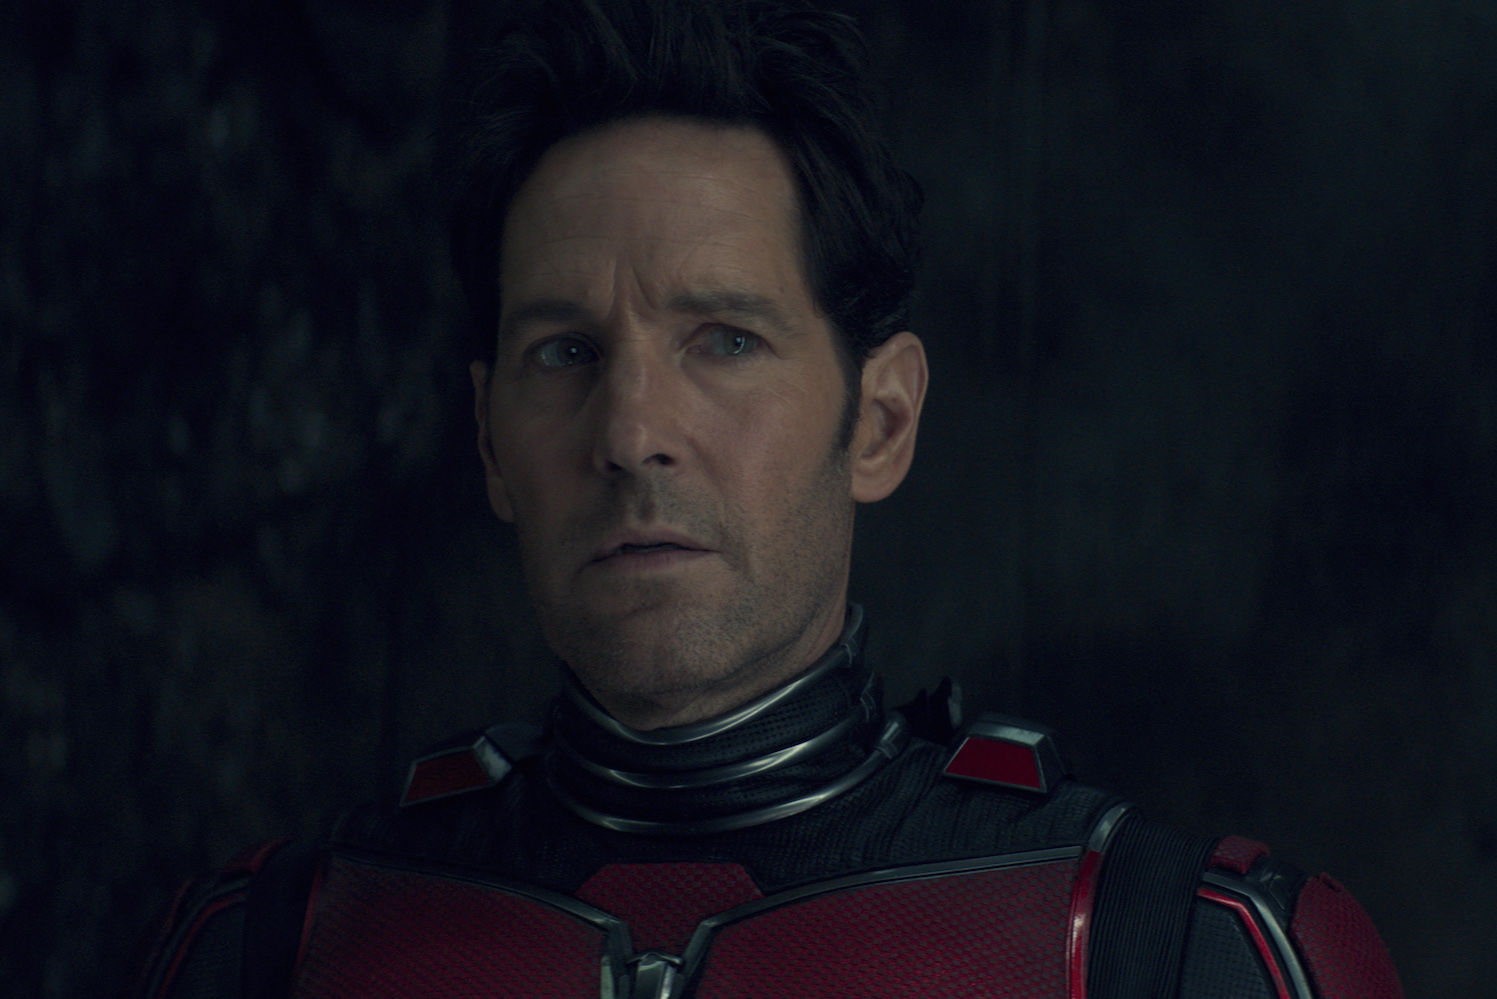 Rotten Tomatoes - Peyton Reed will return to direct the third Ant-Man film.